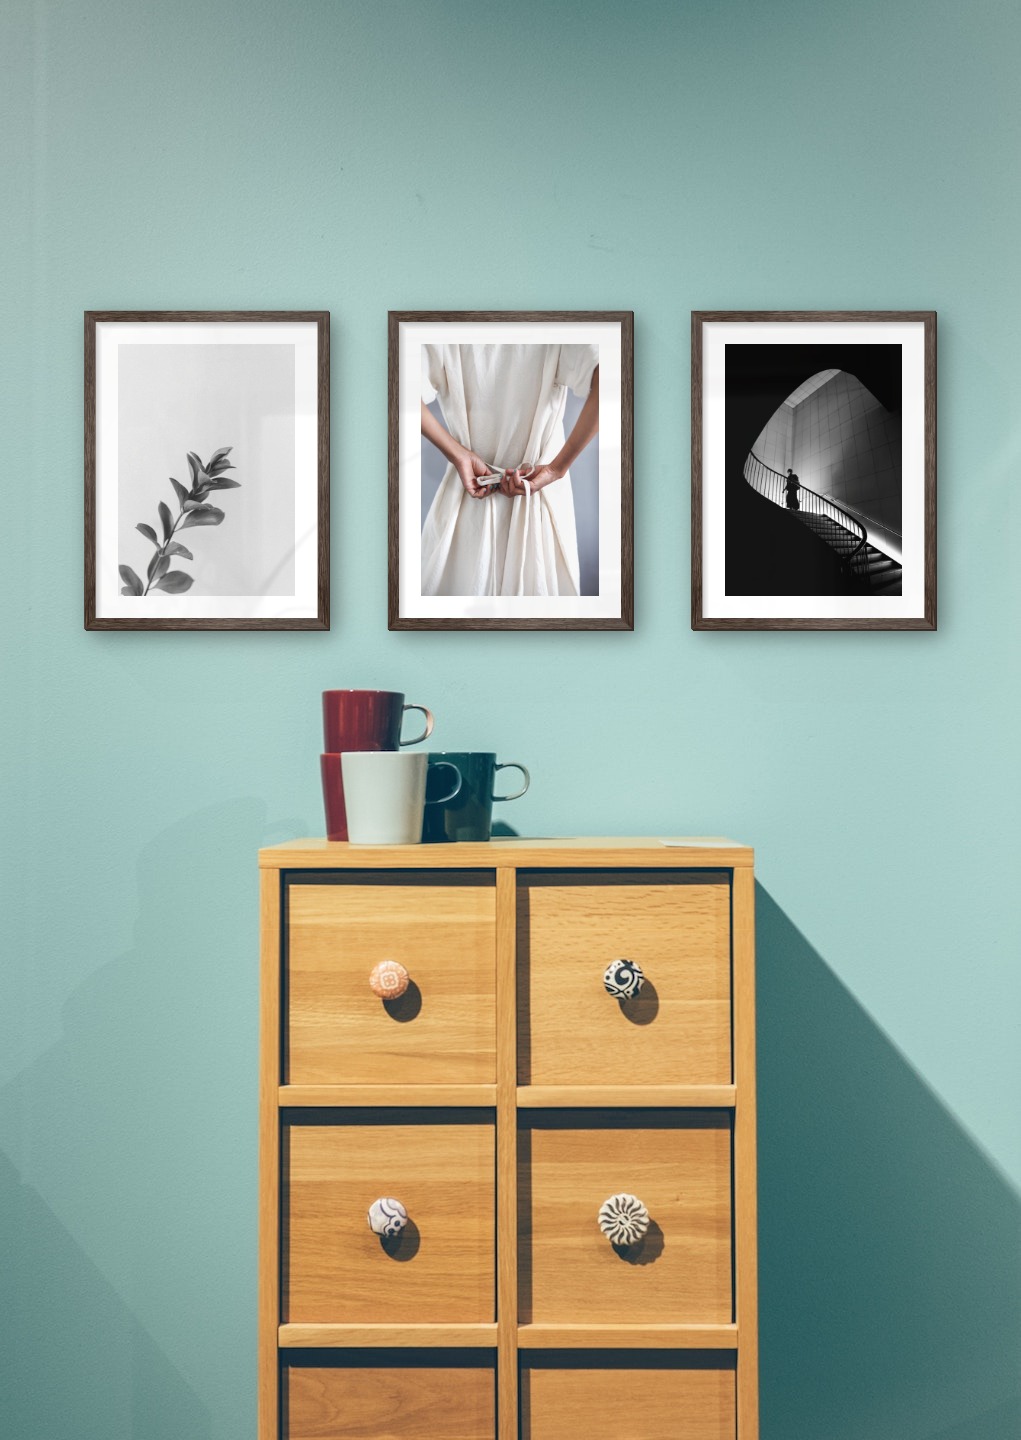 Gallery wall with picture frames in dark wood in sizes 30x40 with prints "Twig", "Dress with waistband" and "Staircase"